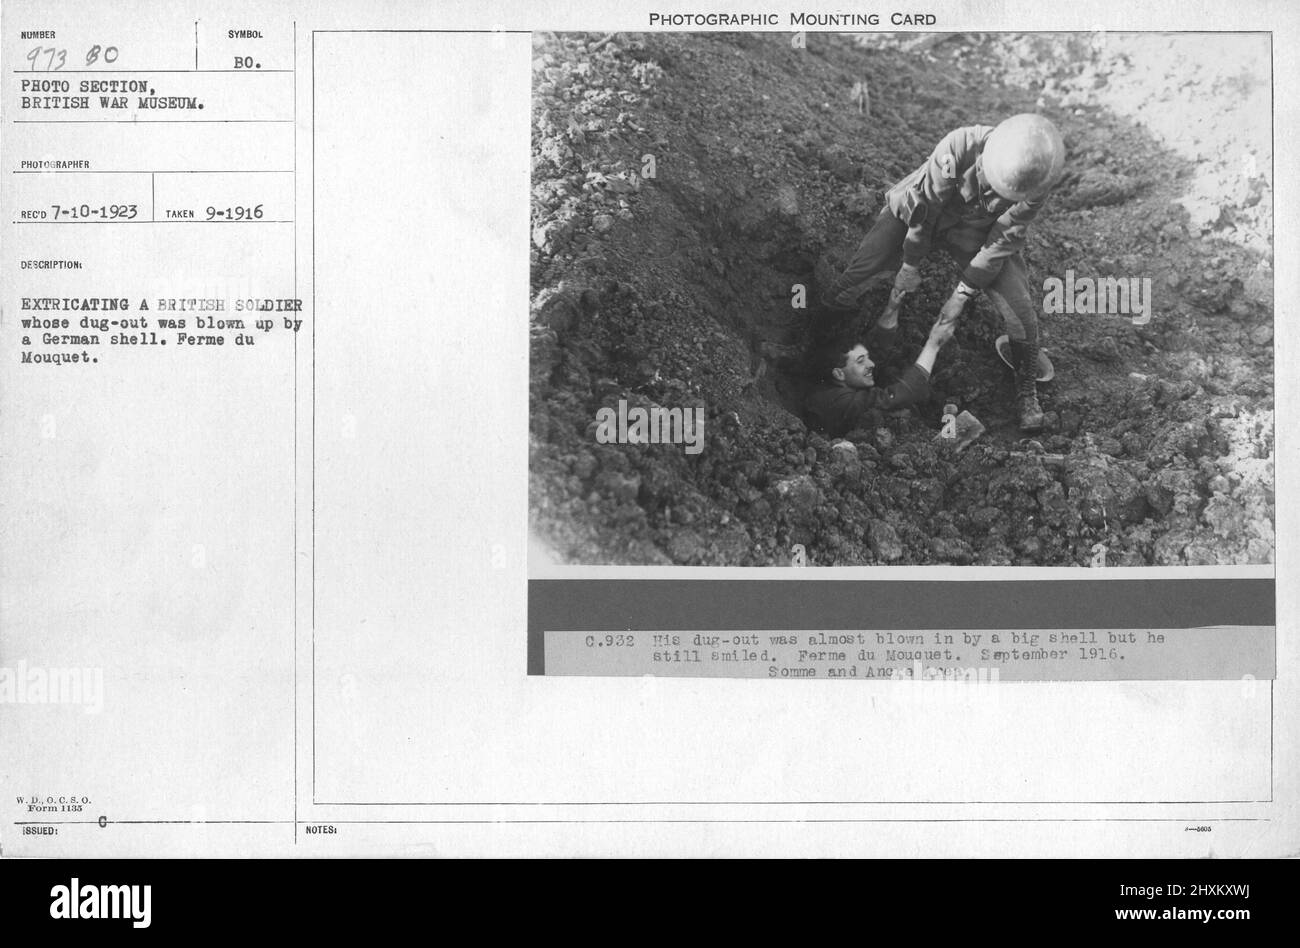 Extricating a British soldier whose dug-out was blown up by a German shell. Ferme du Mouquet. Collection of World War I Photographs, 1914-1918 that depict the military activities of British and other nation's armed forces and personnel during World War I. Stock Photo